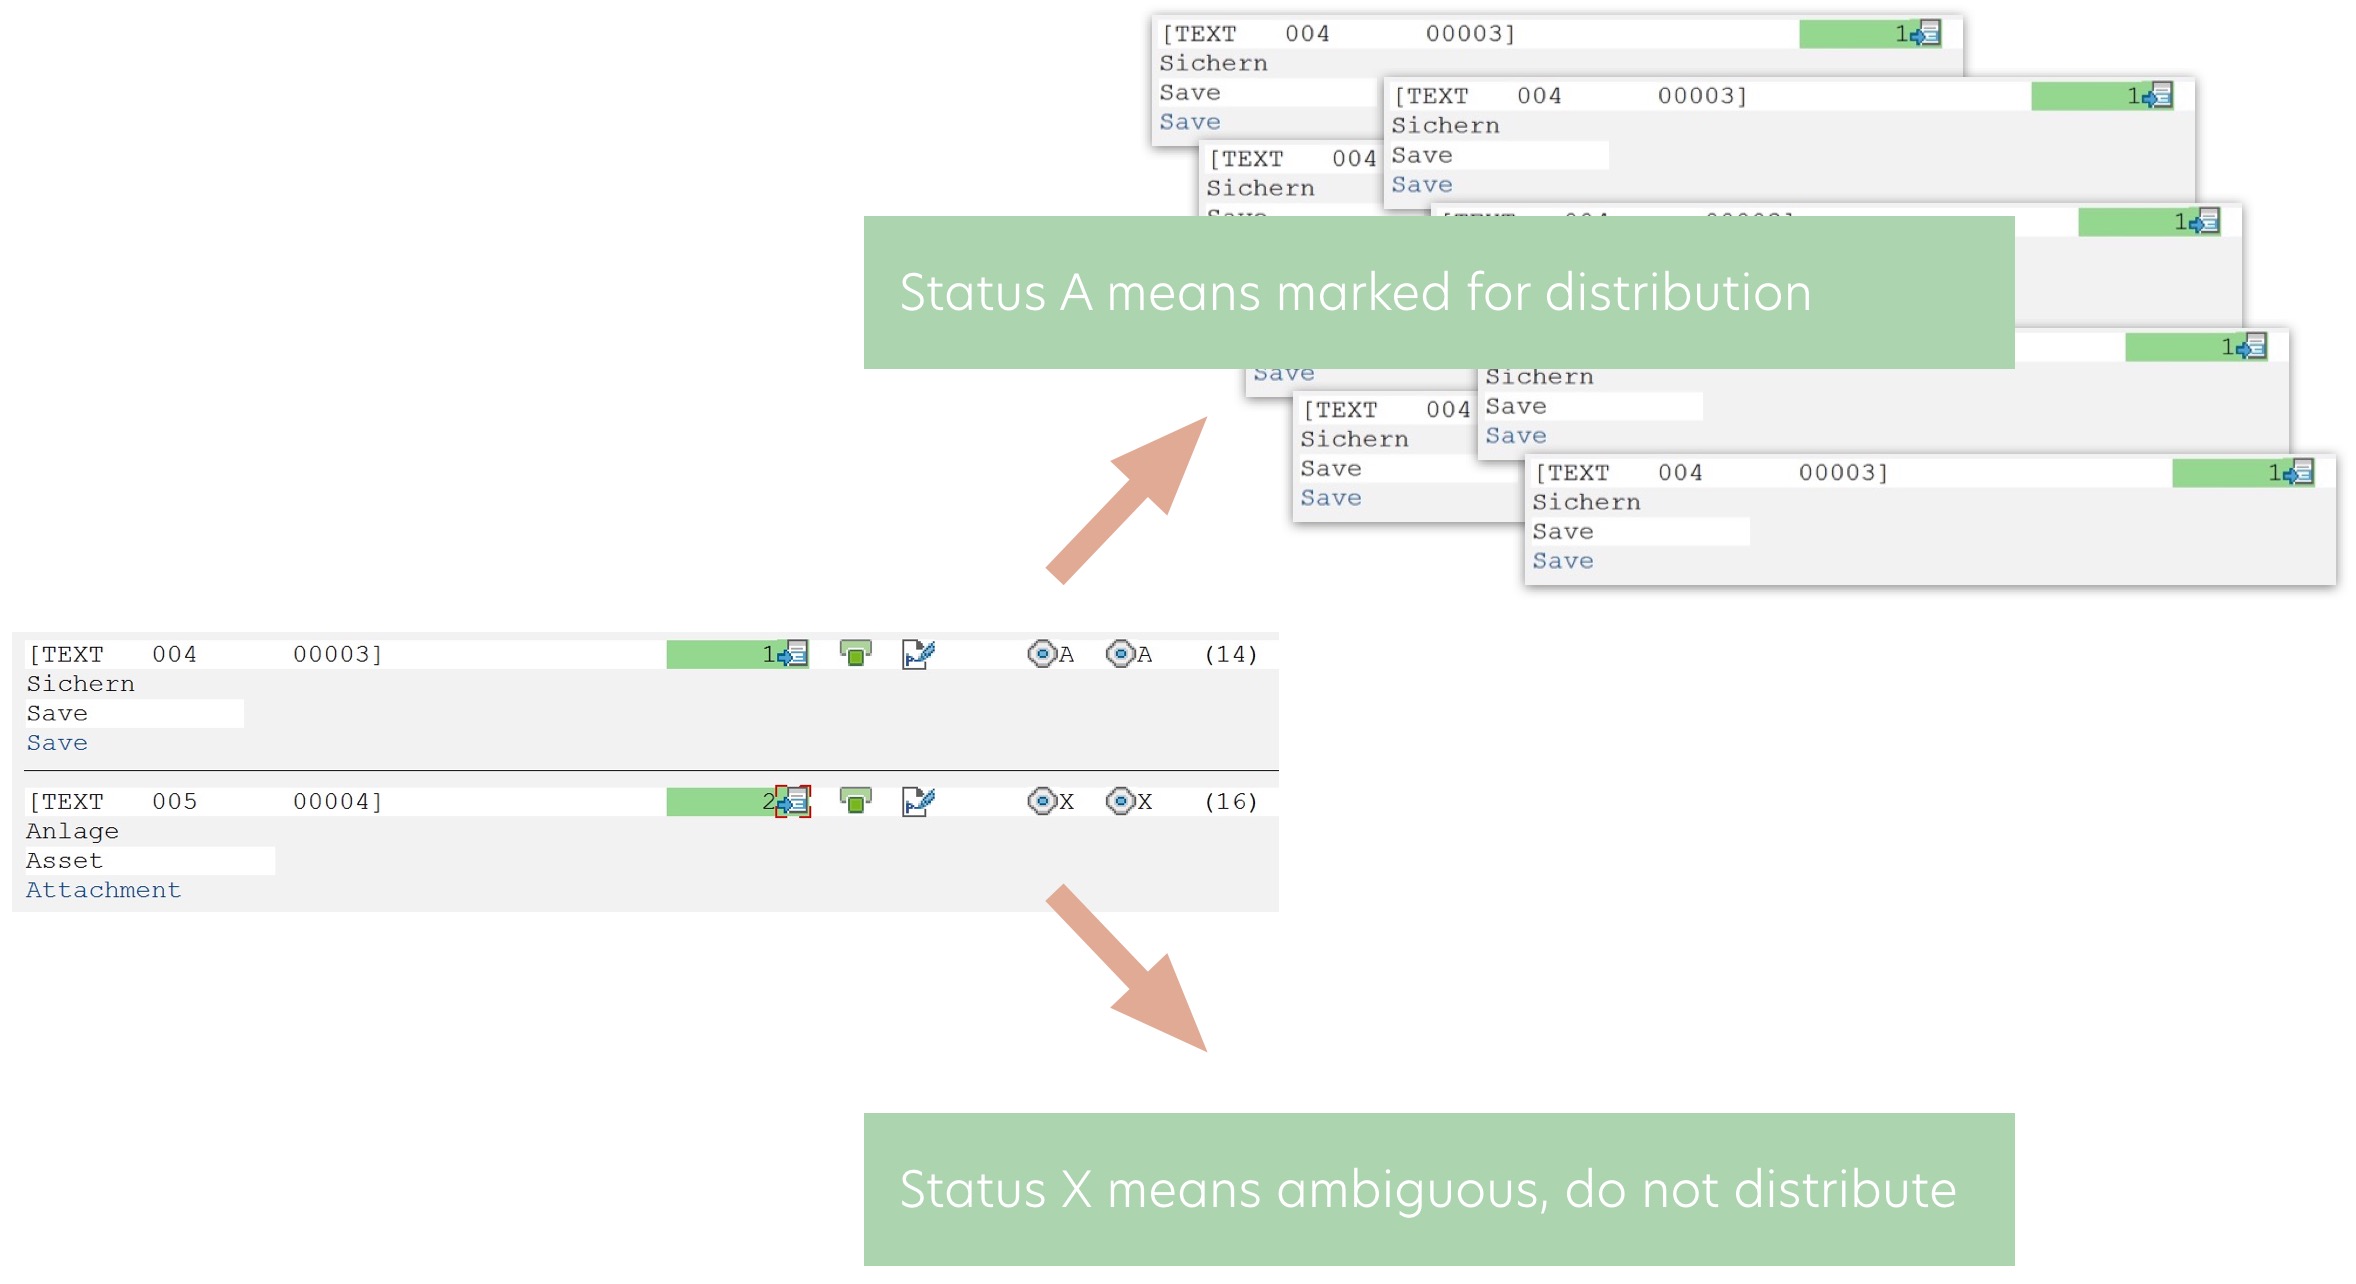 Translators can create proposals with status A to mark them for distribution.